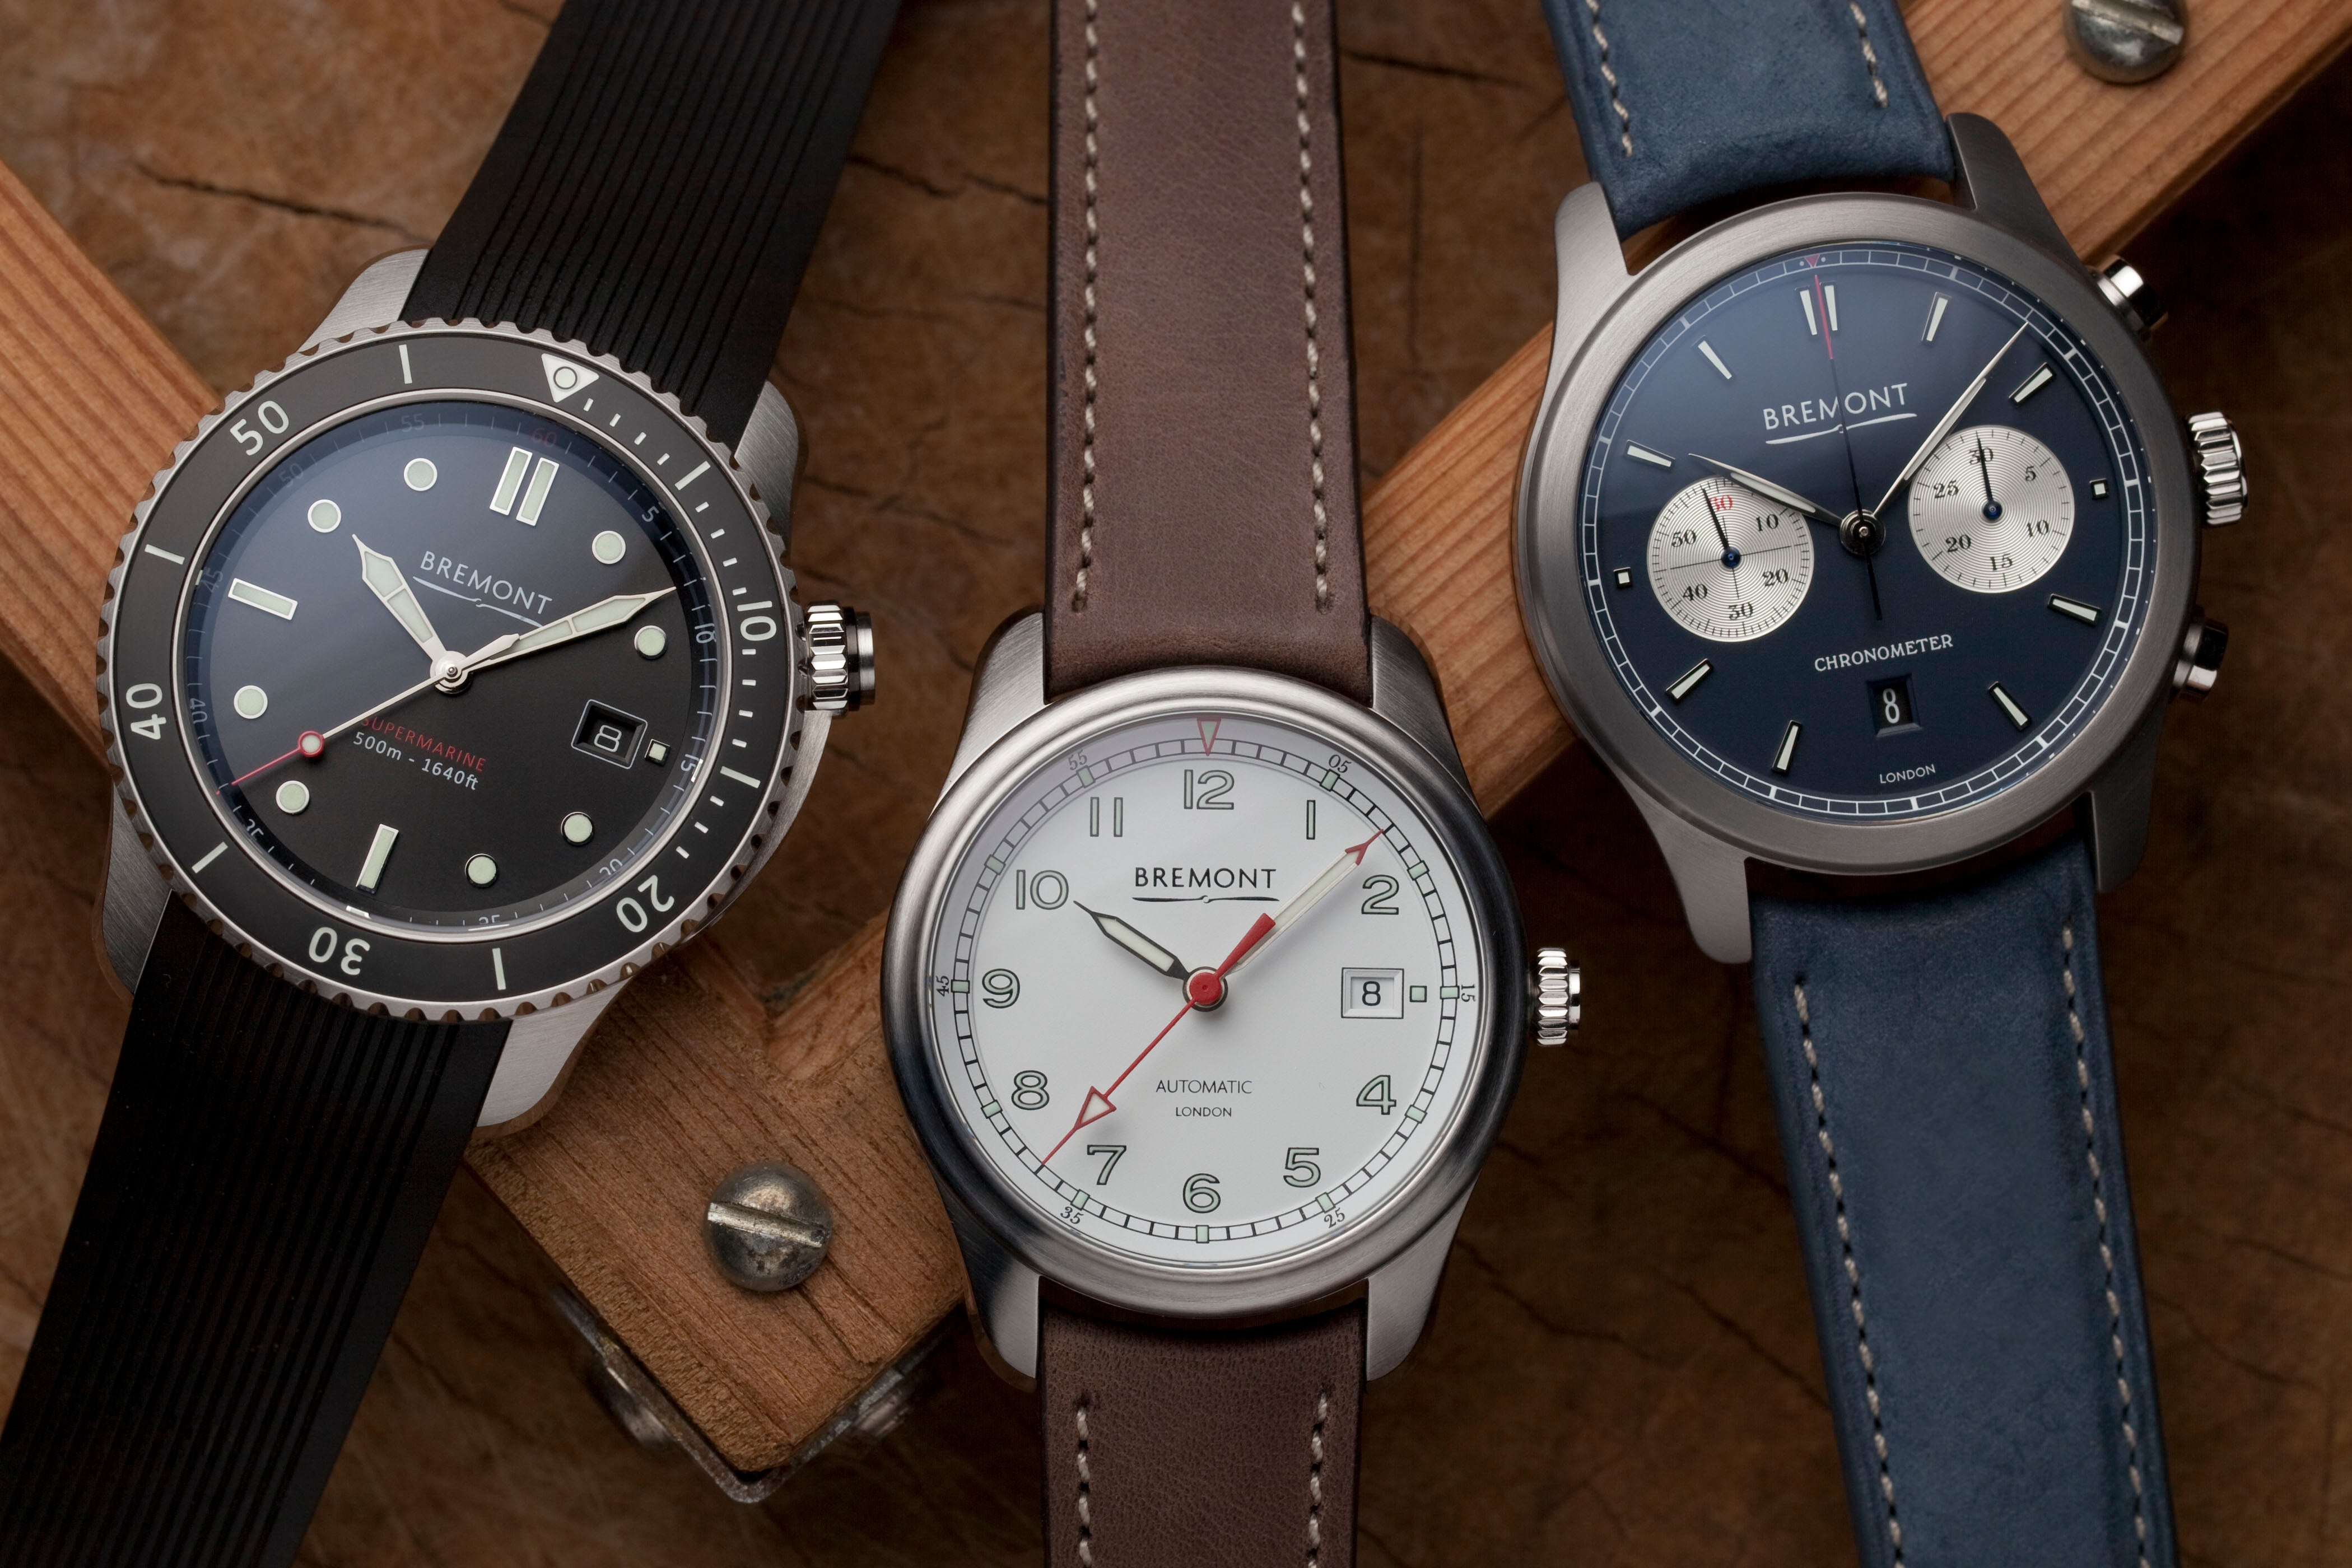 Why Invest In A Bremont Watch? – Bremont Watch Company